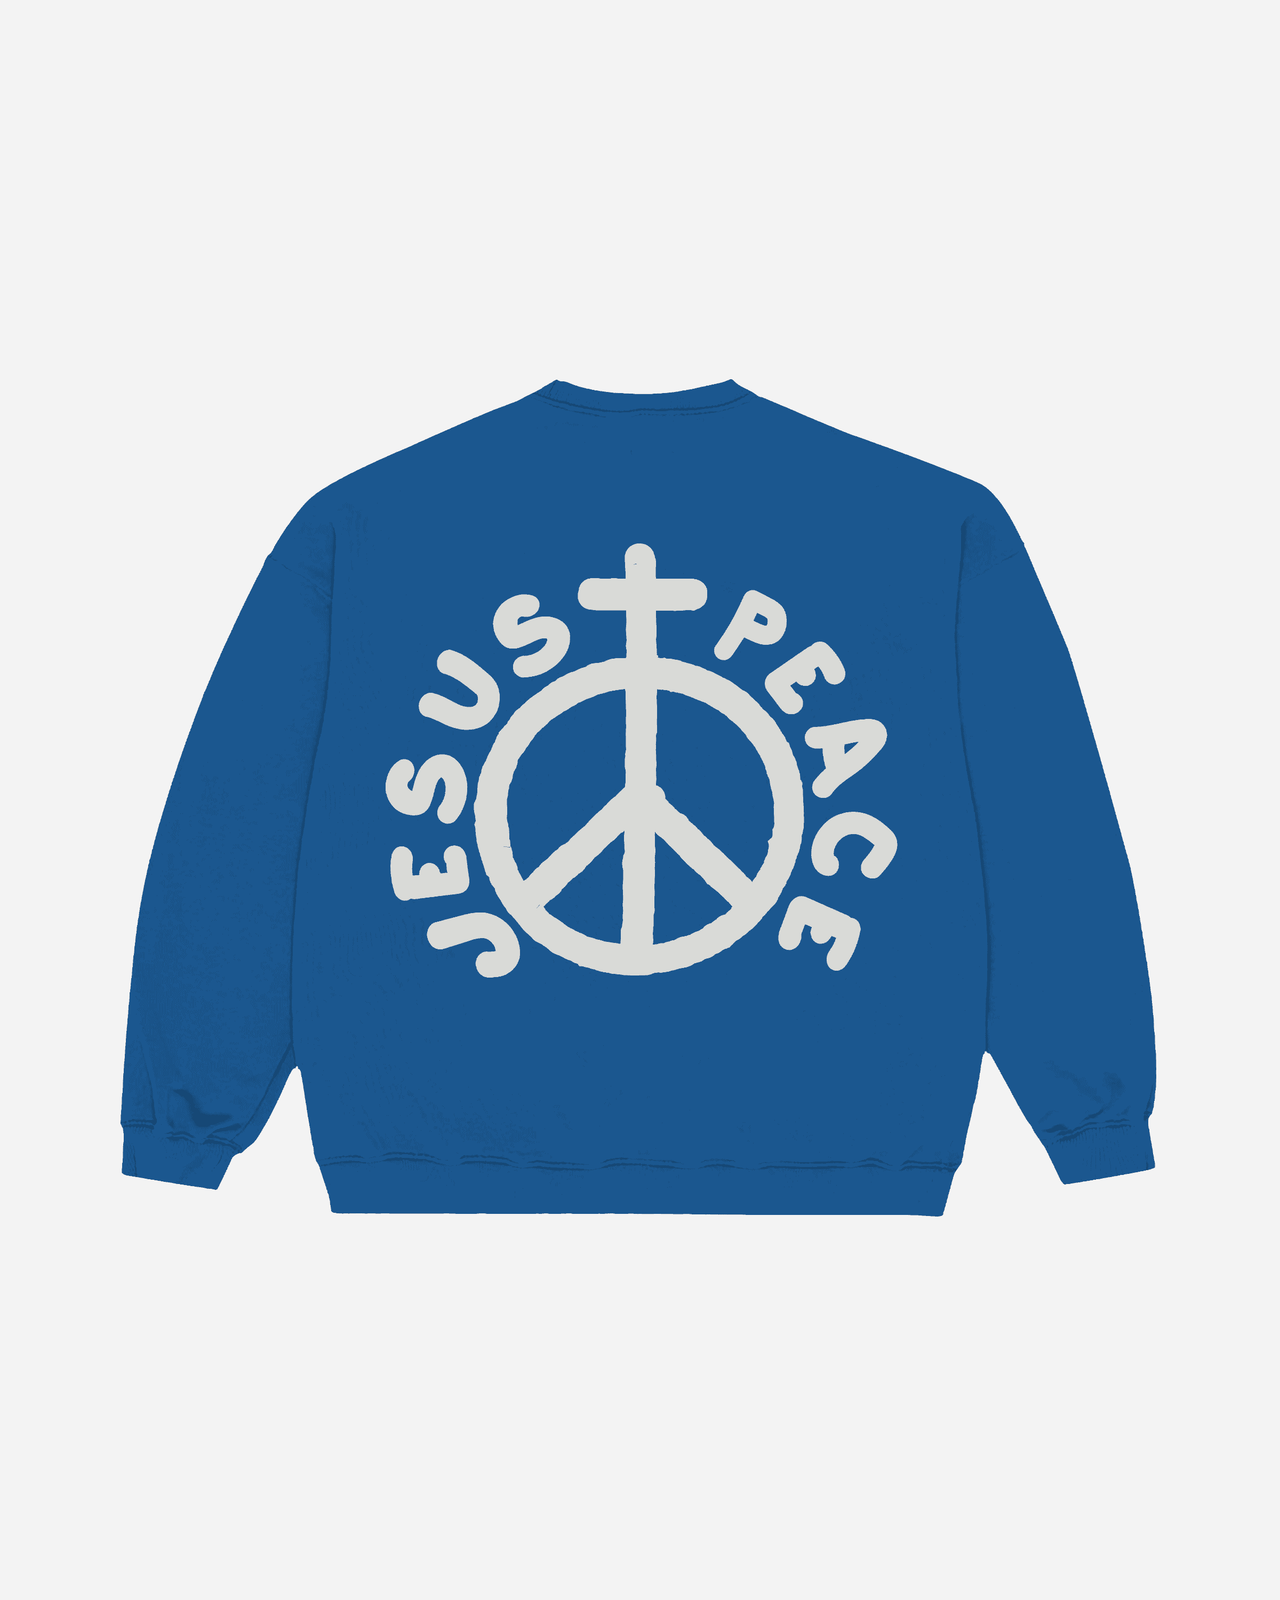 "Jesus Peace" Crewneck Sweatshirt in Royal for the modern day Jesus People movement. A collection inspired by the words of 2 Thessalonians. Made in the USA by NHIM Apparel Christian clothing brand